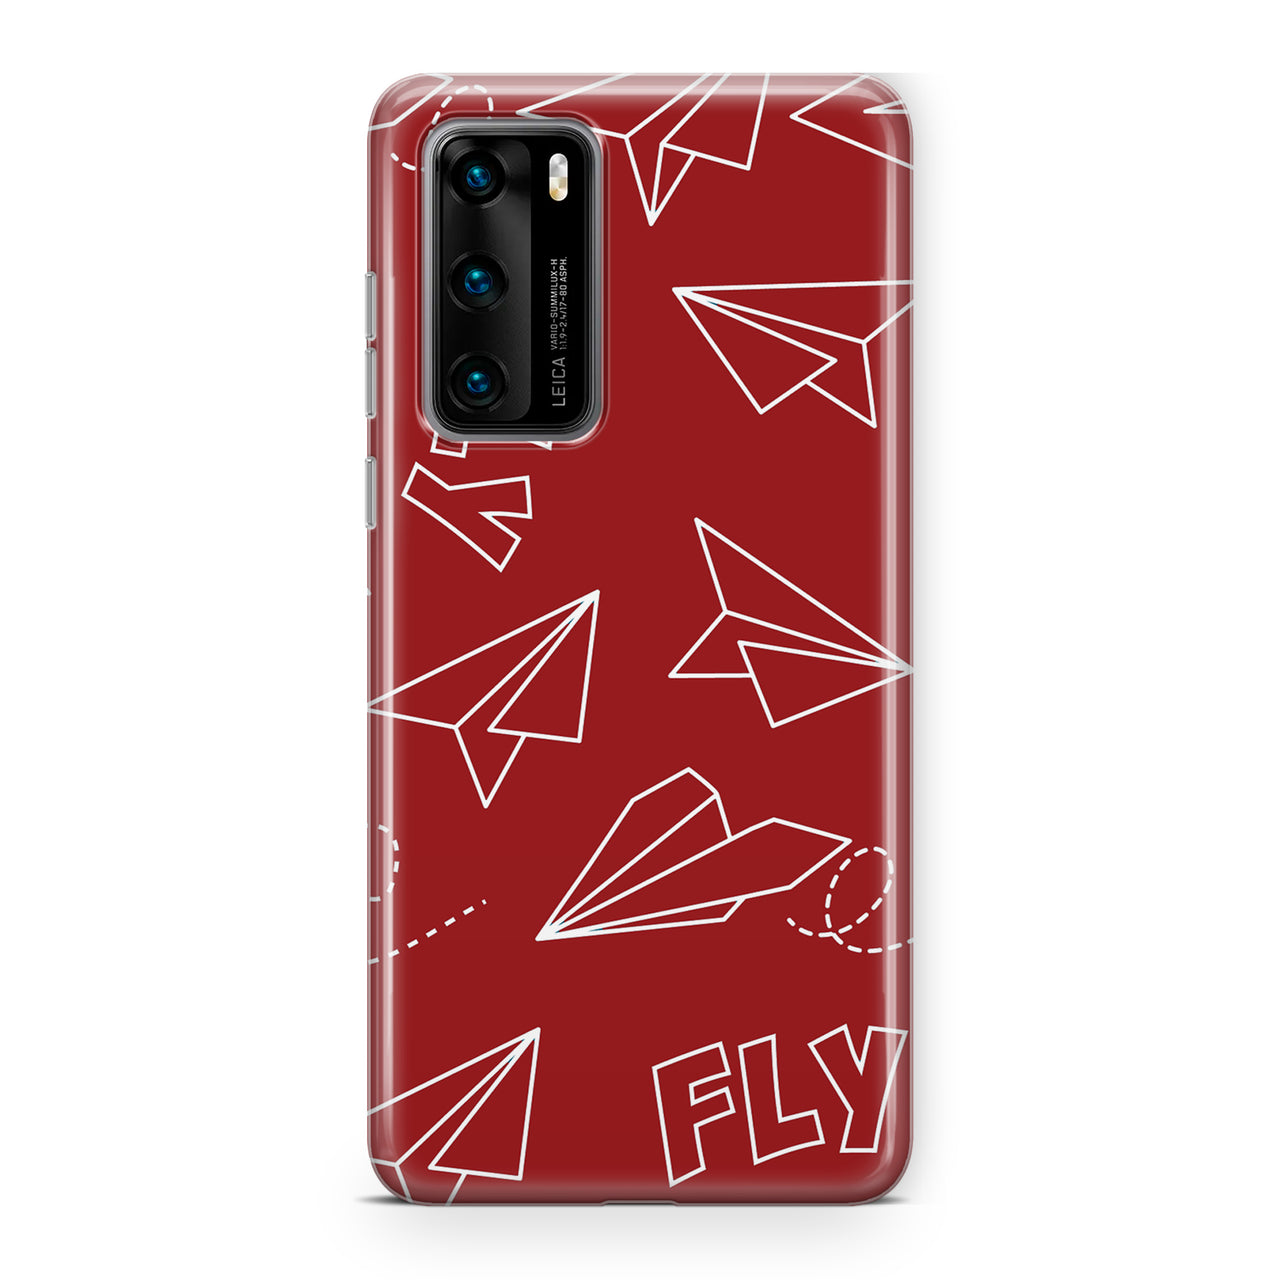 Paper Airplane & Fly-Red Designed Huawei Cases